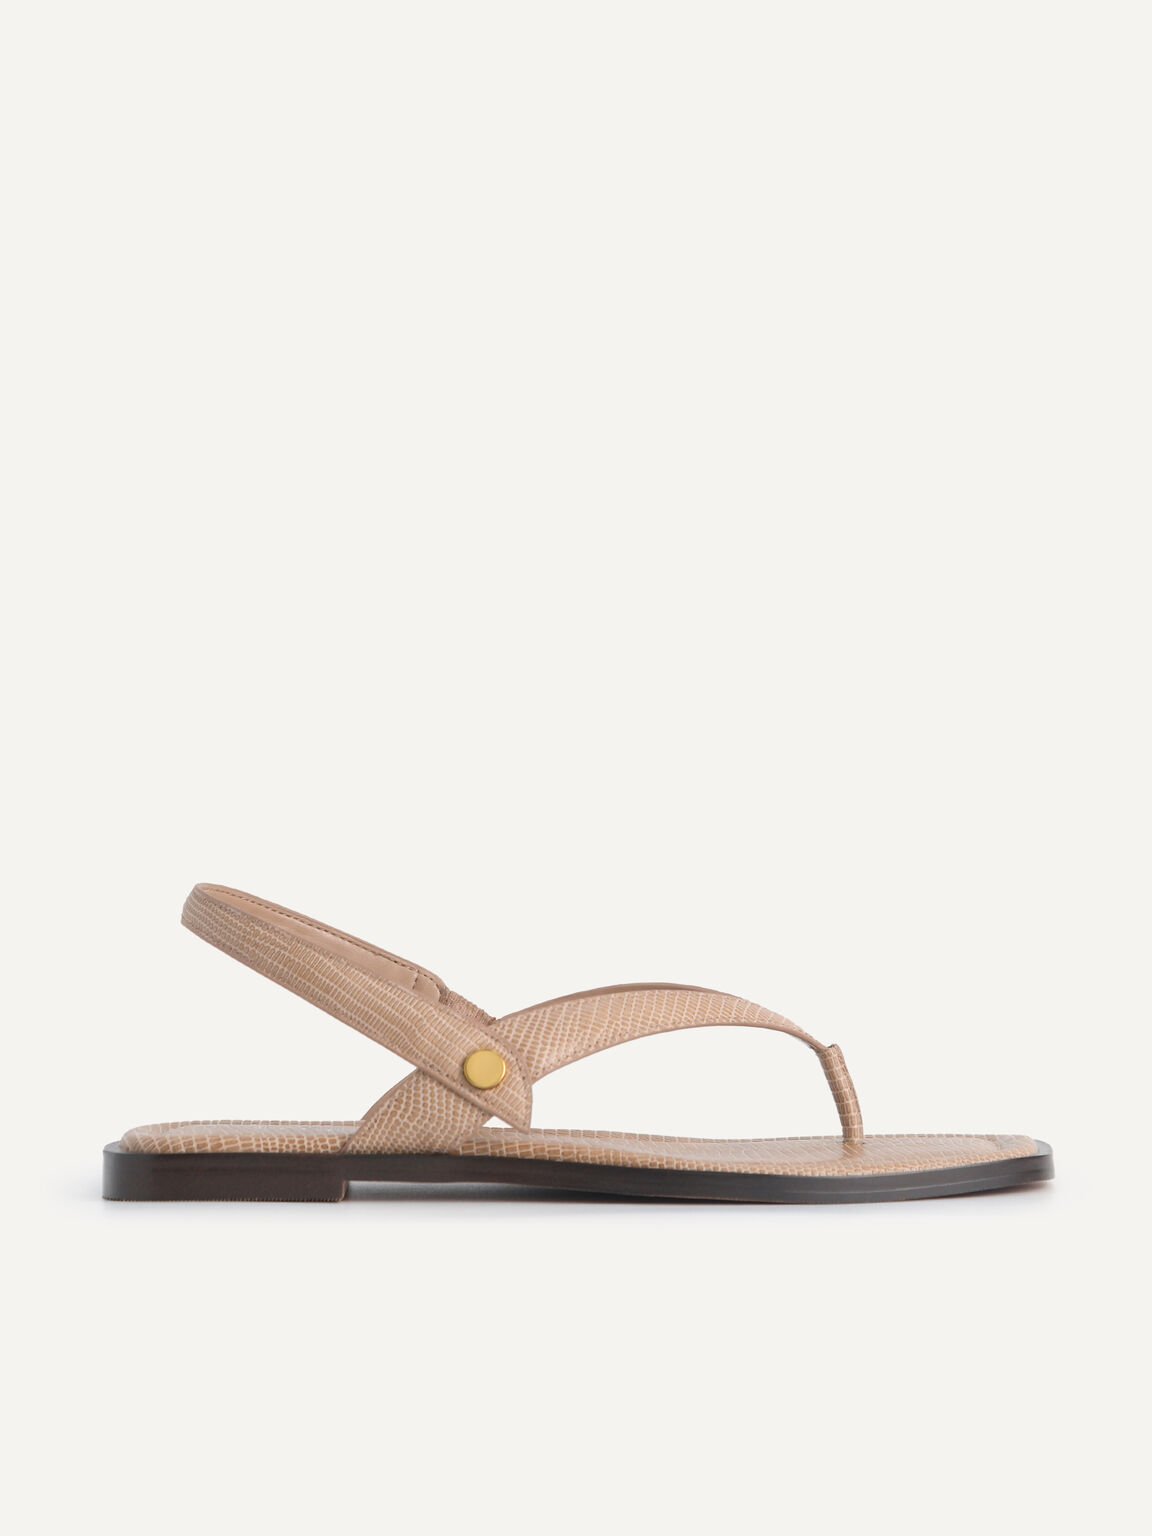 Lizard-Effect Slingback Thong Sandals, Taupe